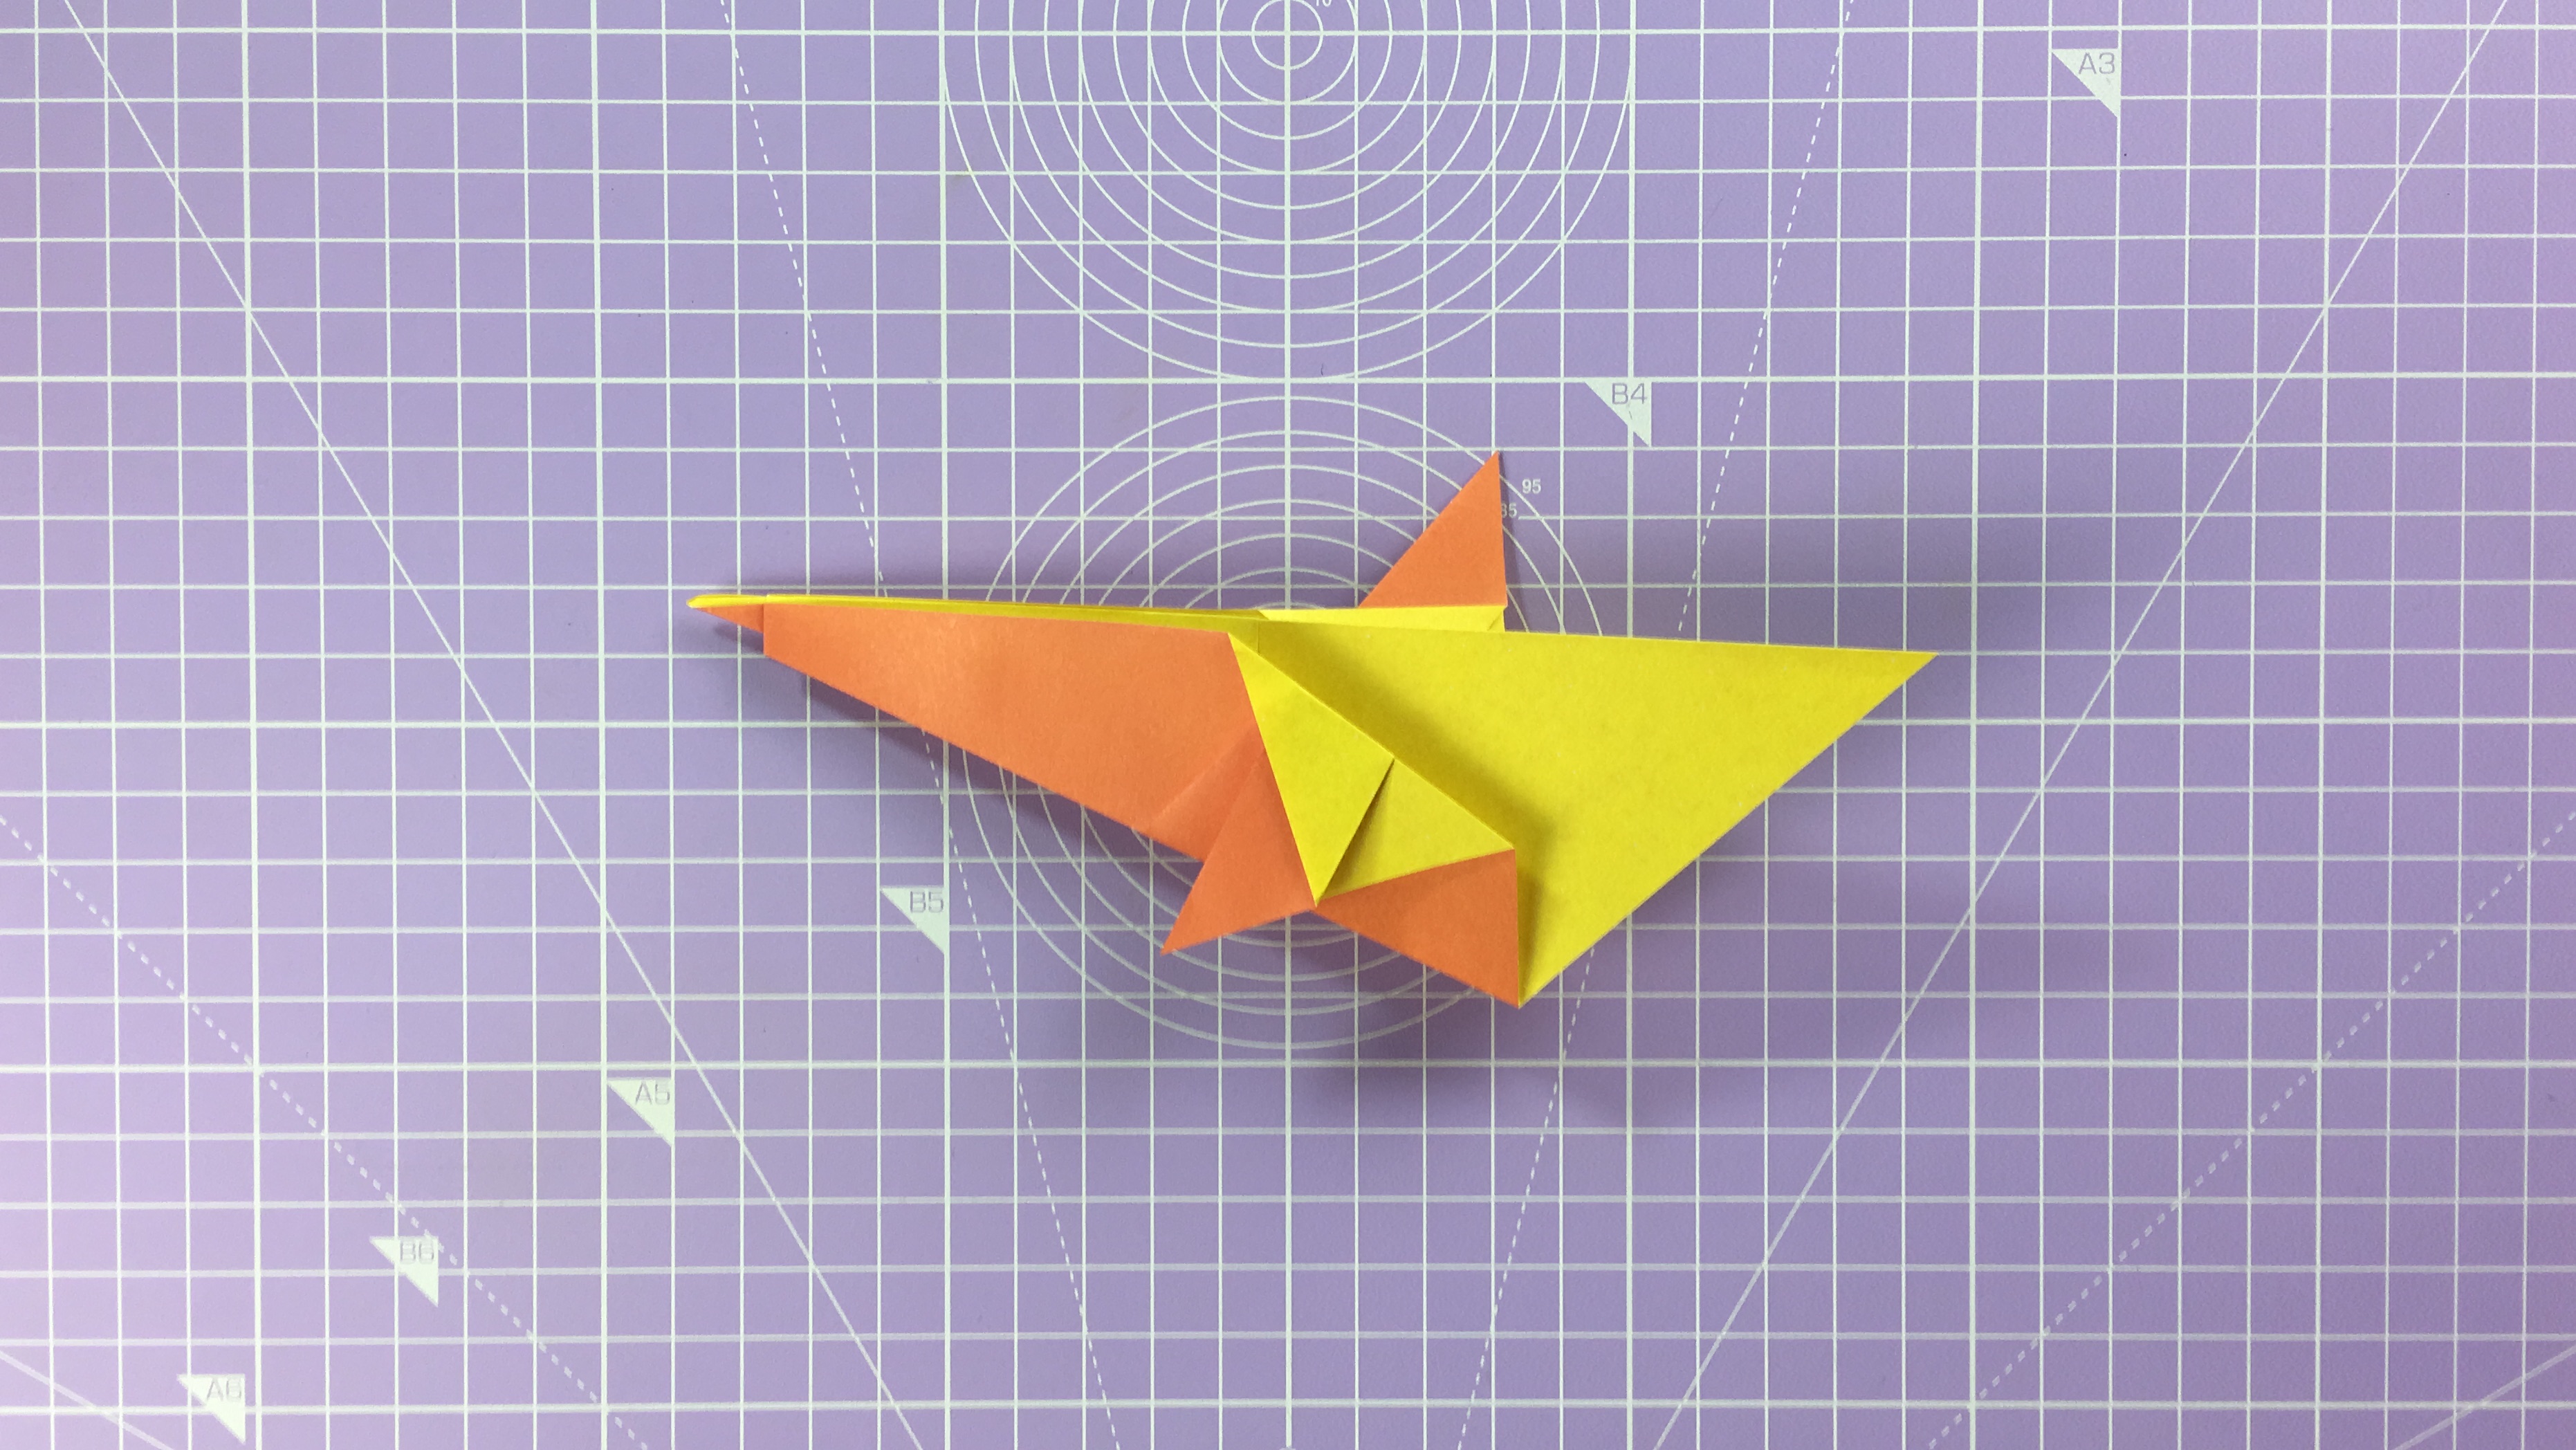 How to make an origami duck - step 11a